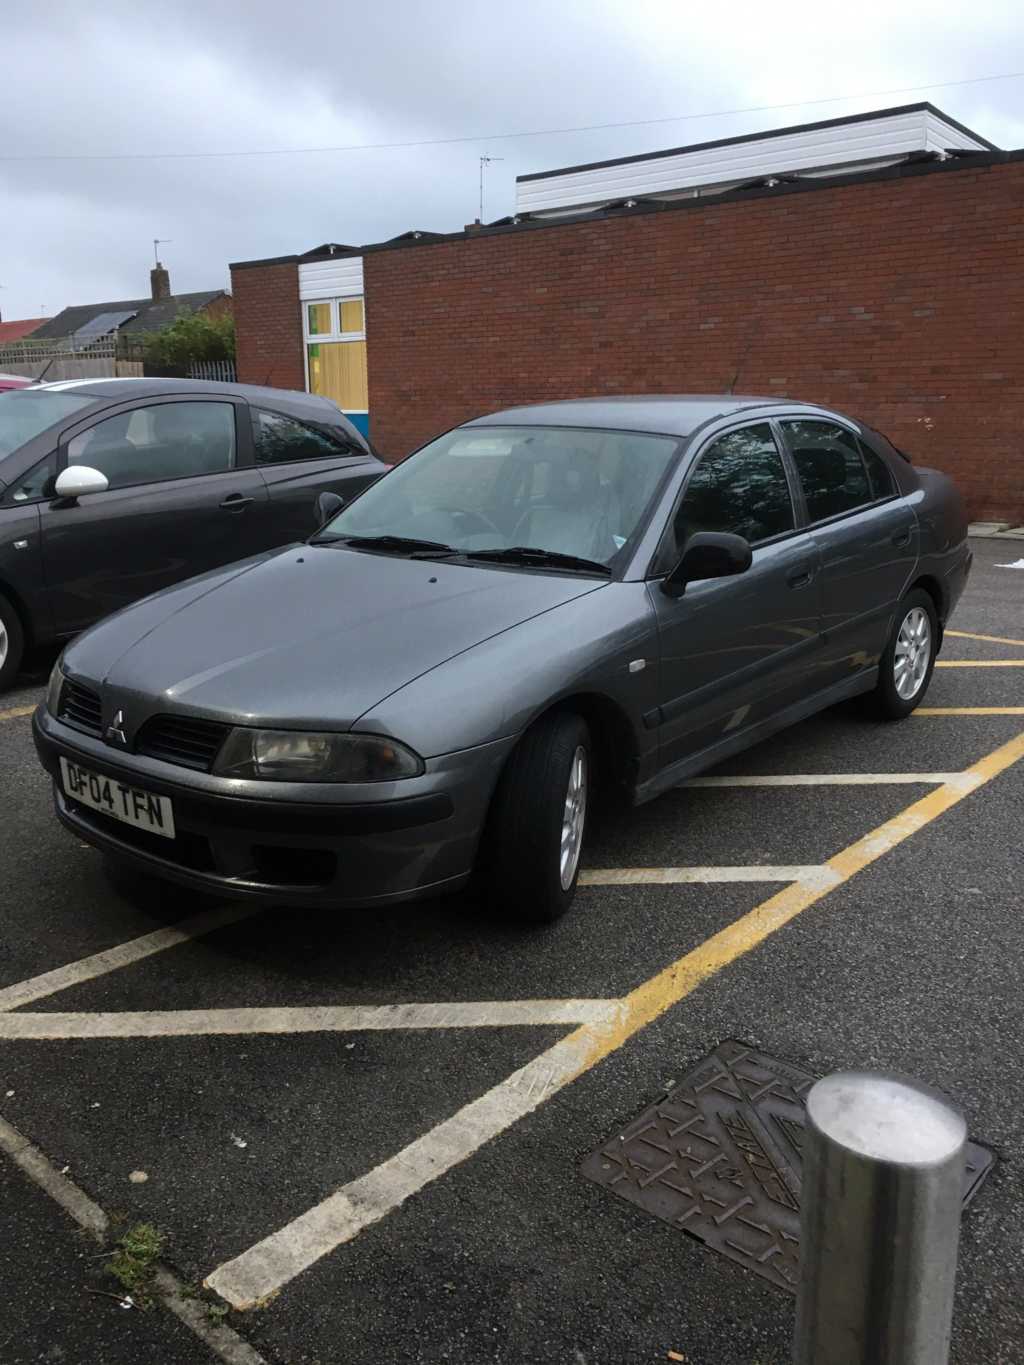 DF04 TFN displaying Inconsiderate Parking